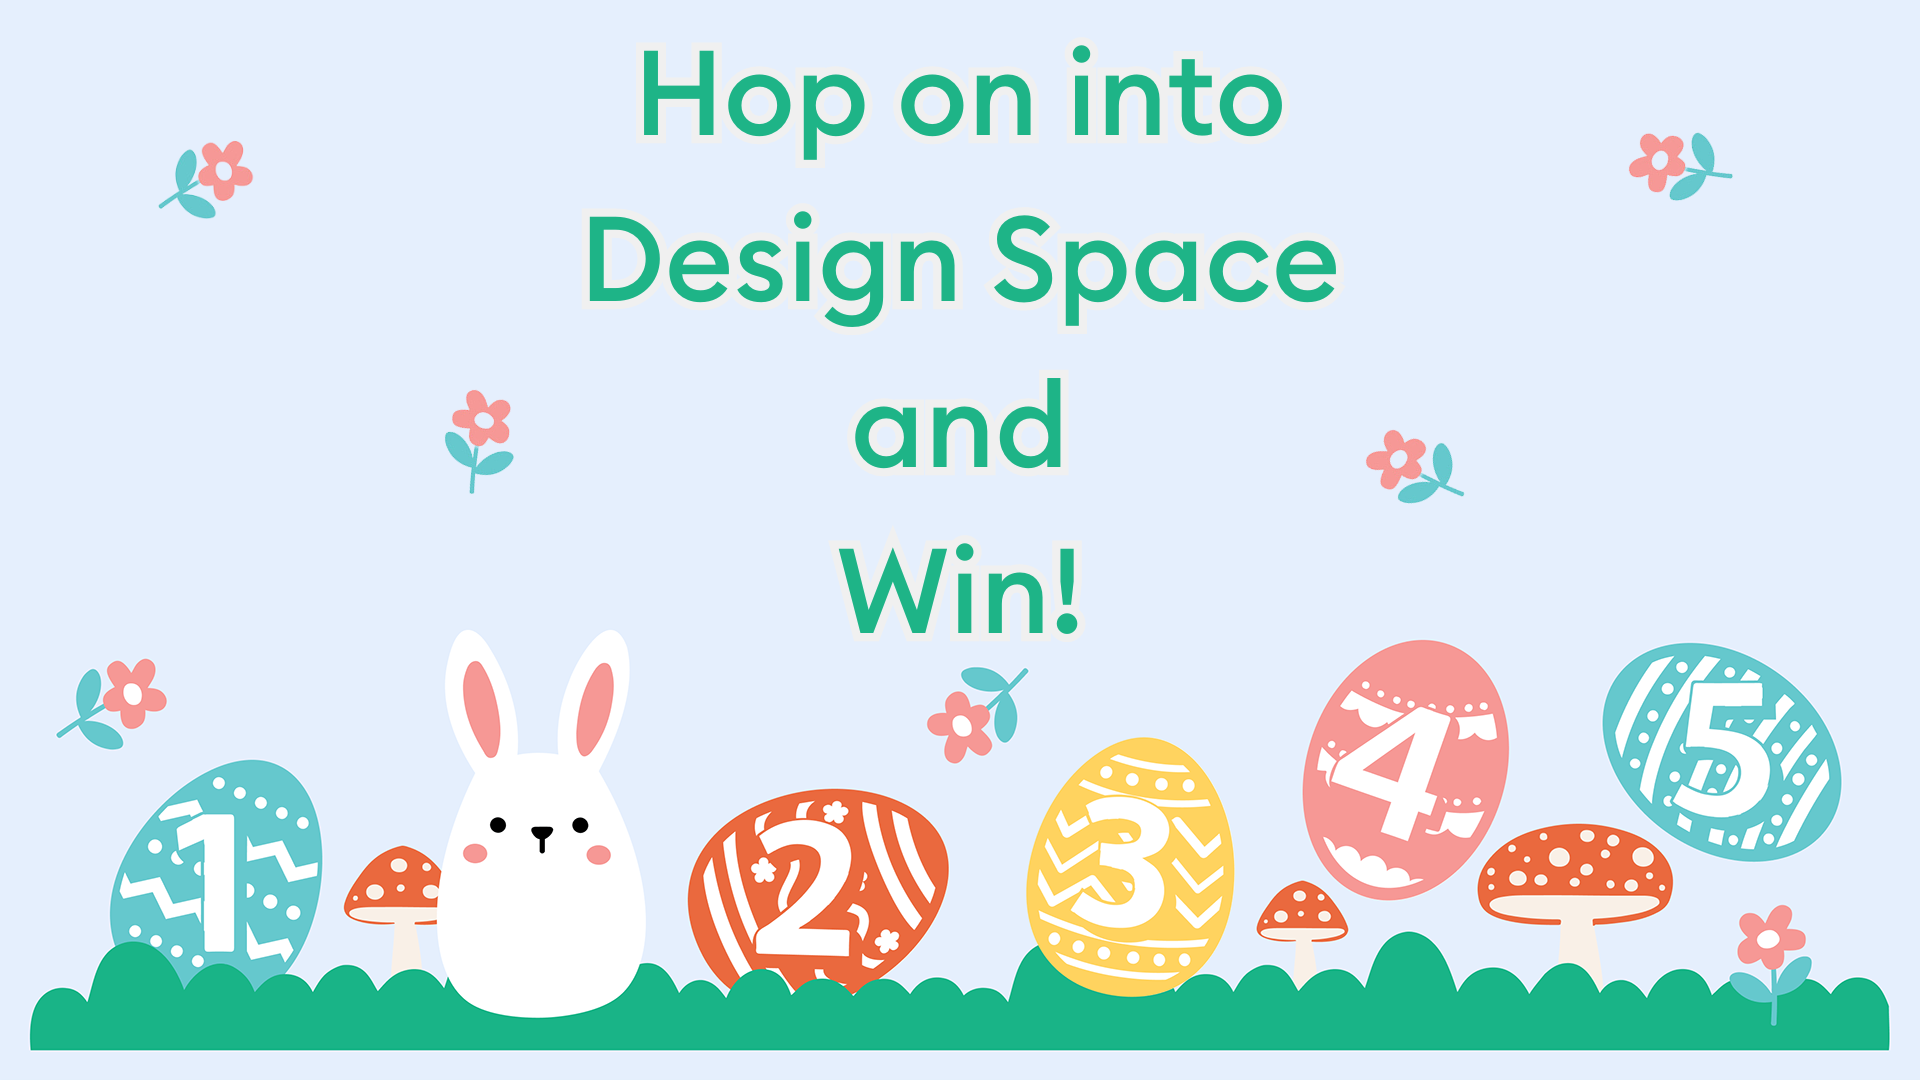 Hop on into Design Space and win!